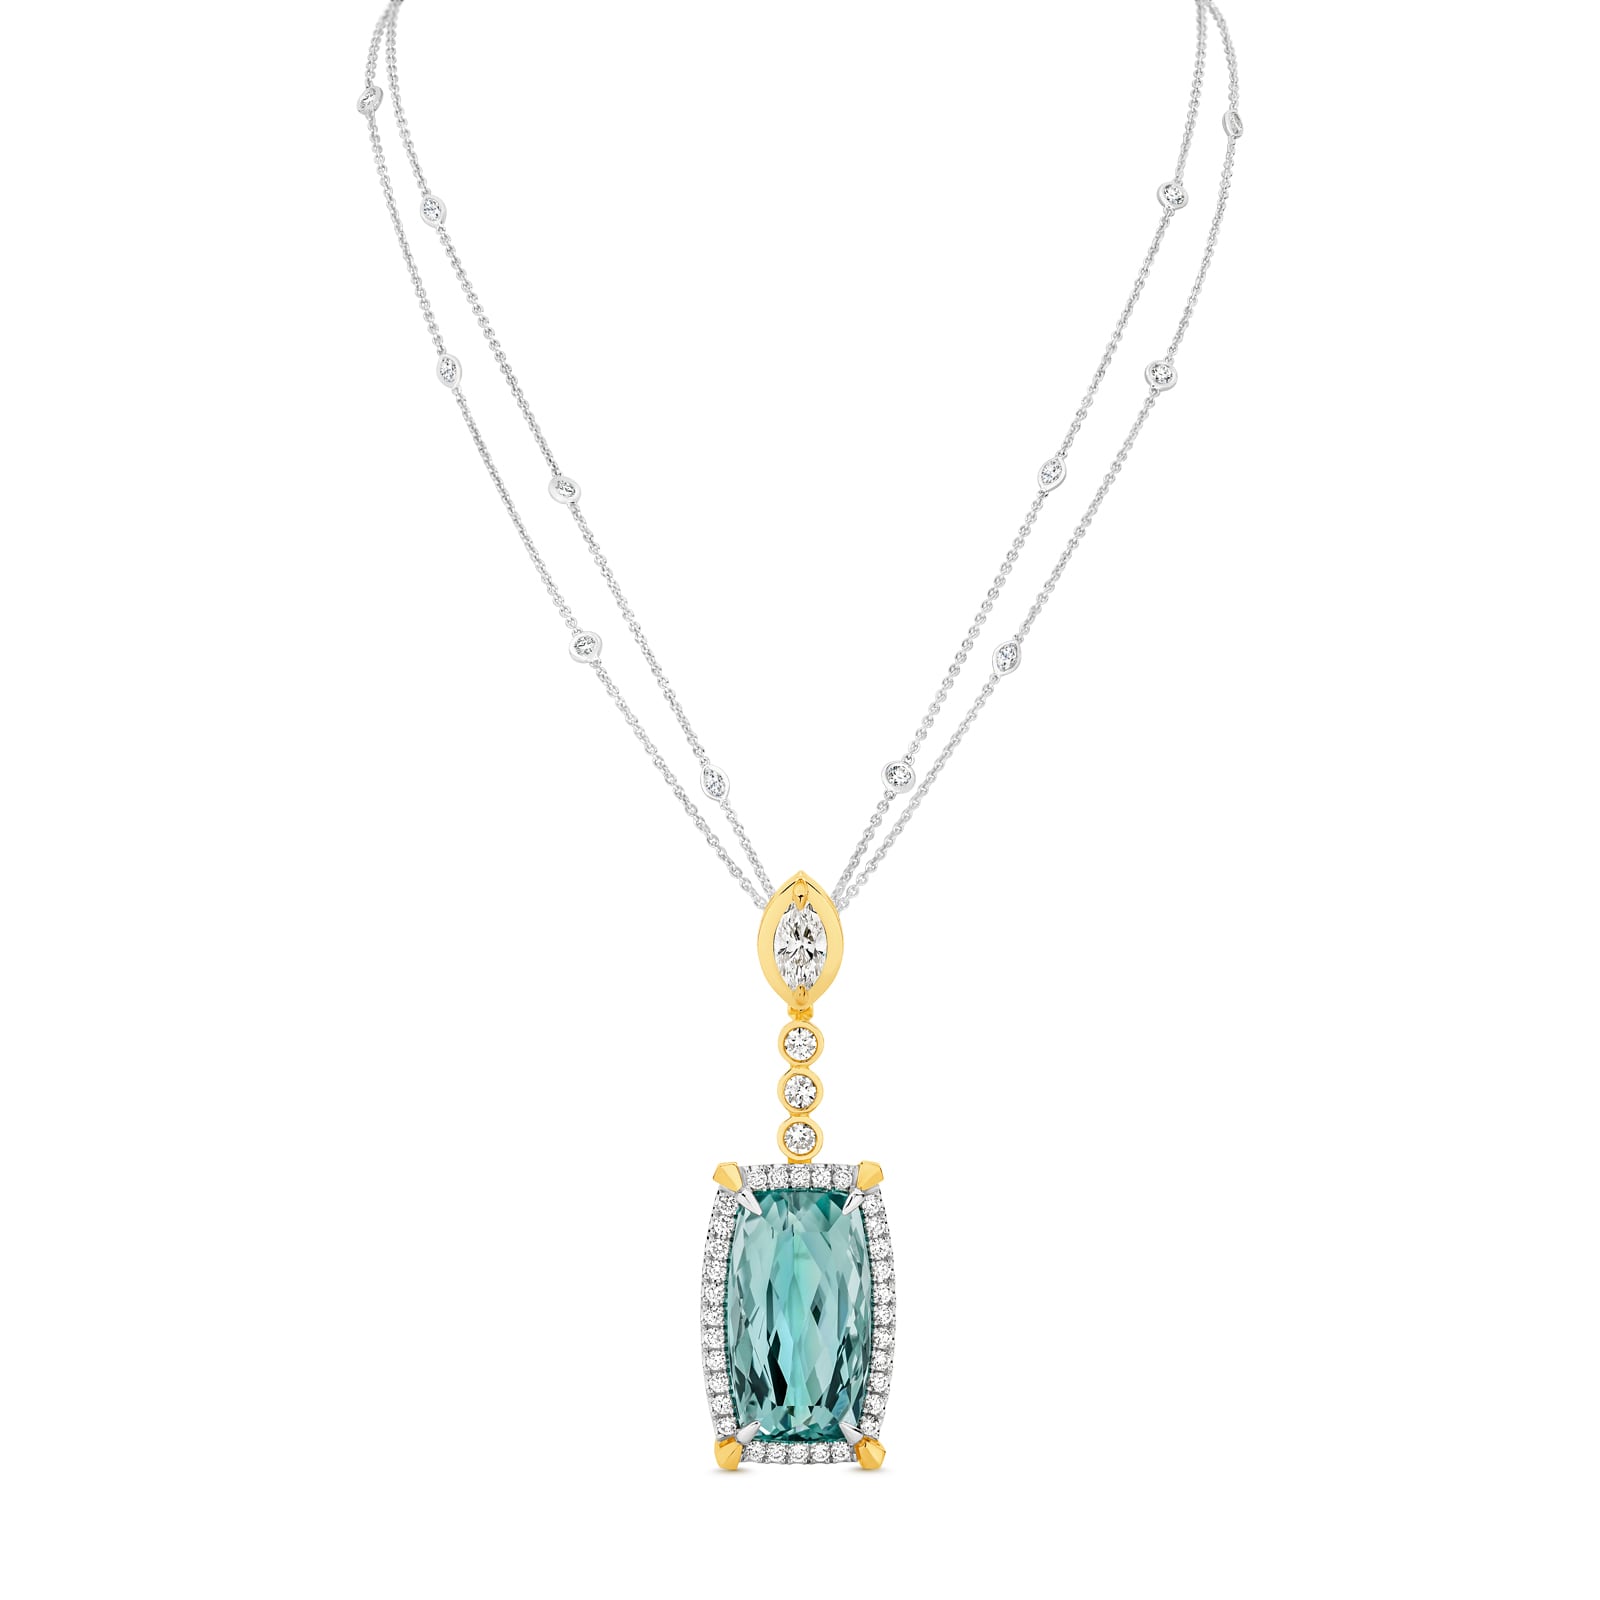 Keilana is a 7.23 carat cushion cut Mint Tourmaline and diamond pendant. She was designed and handcrafted by LeGassick's Master Jewellers, Gold Coast, Australia.